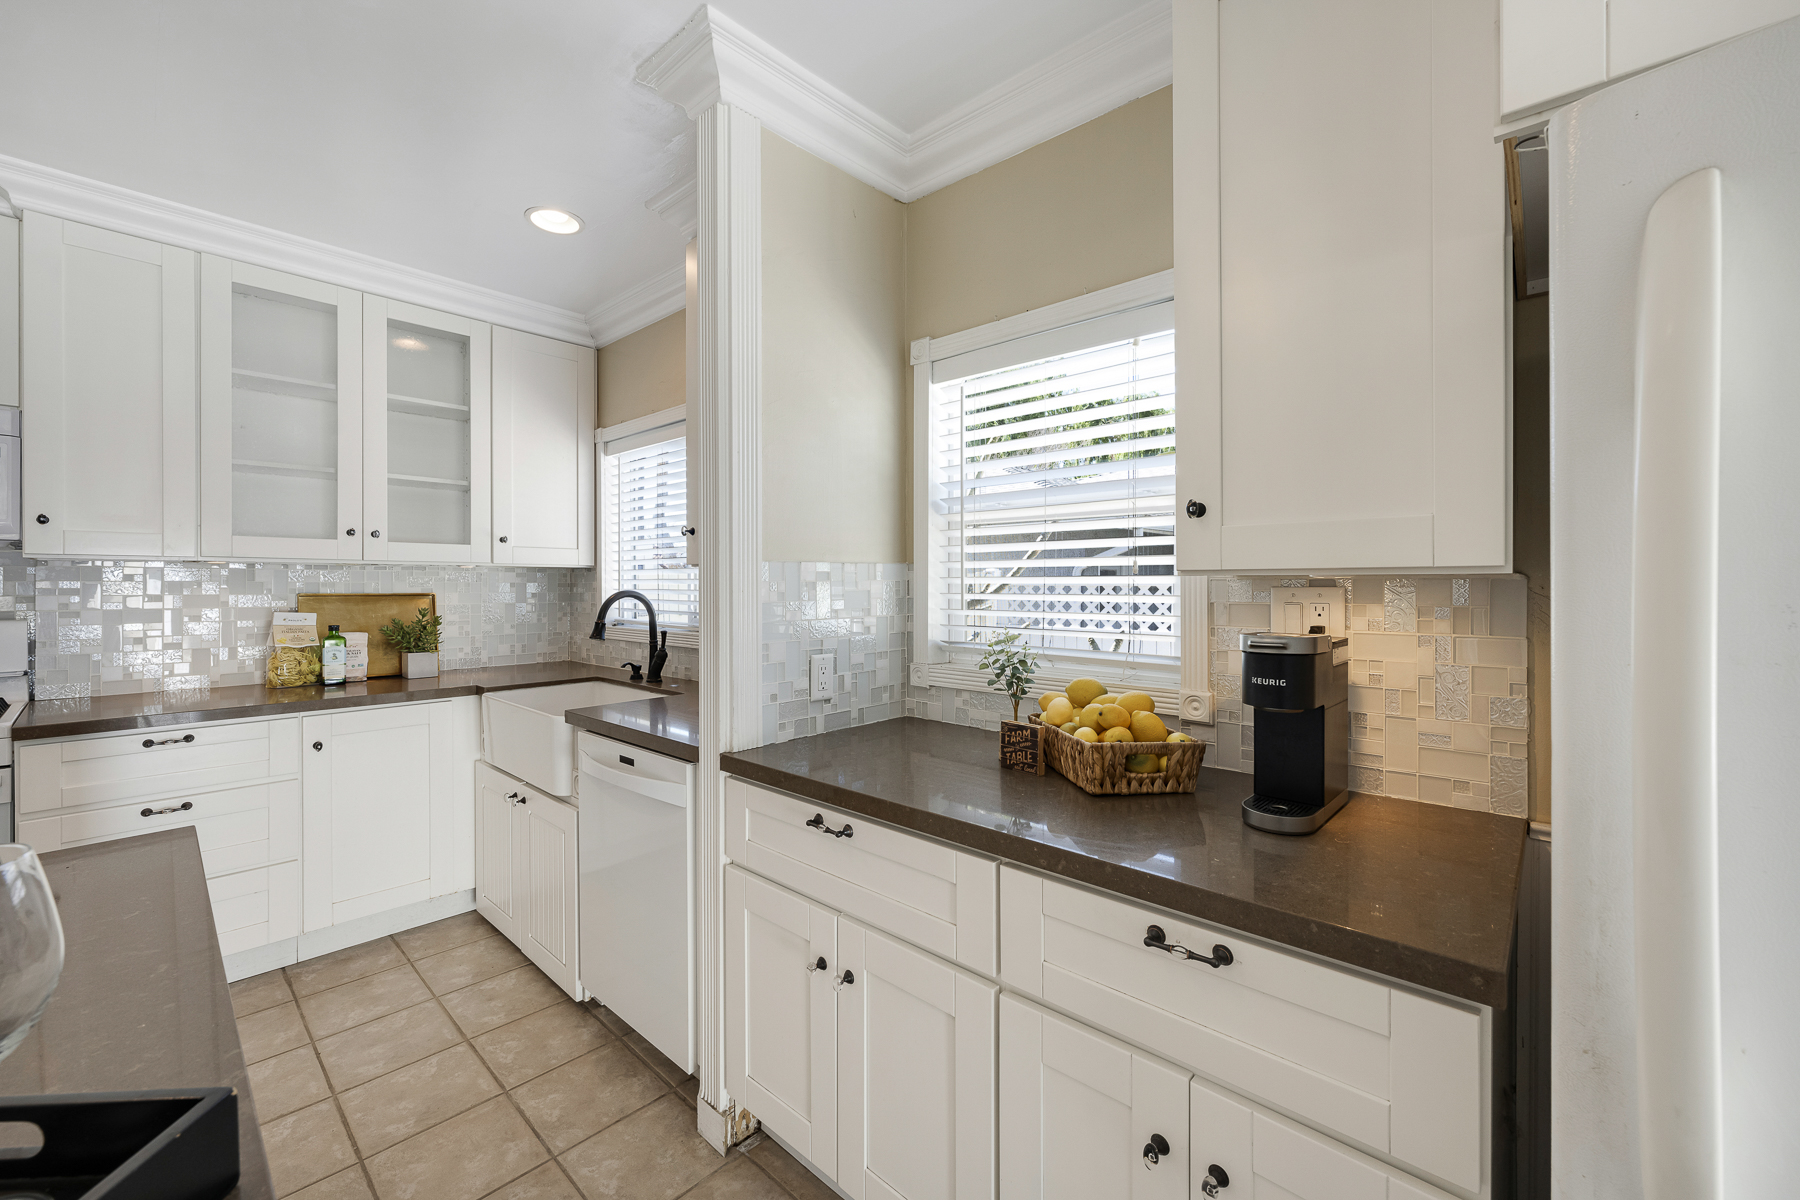 1229 Grove Place Fullerton CA 92831: Kitchen with coffee nook